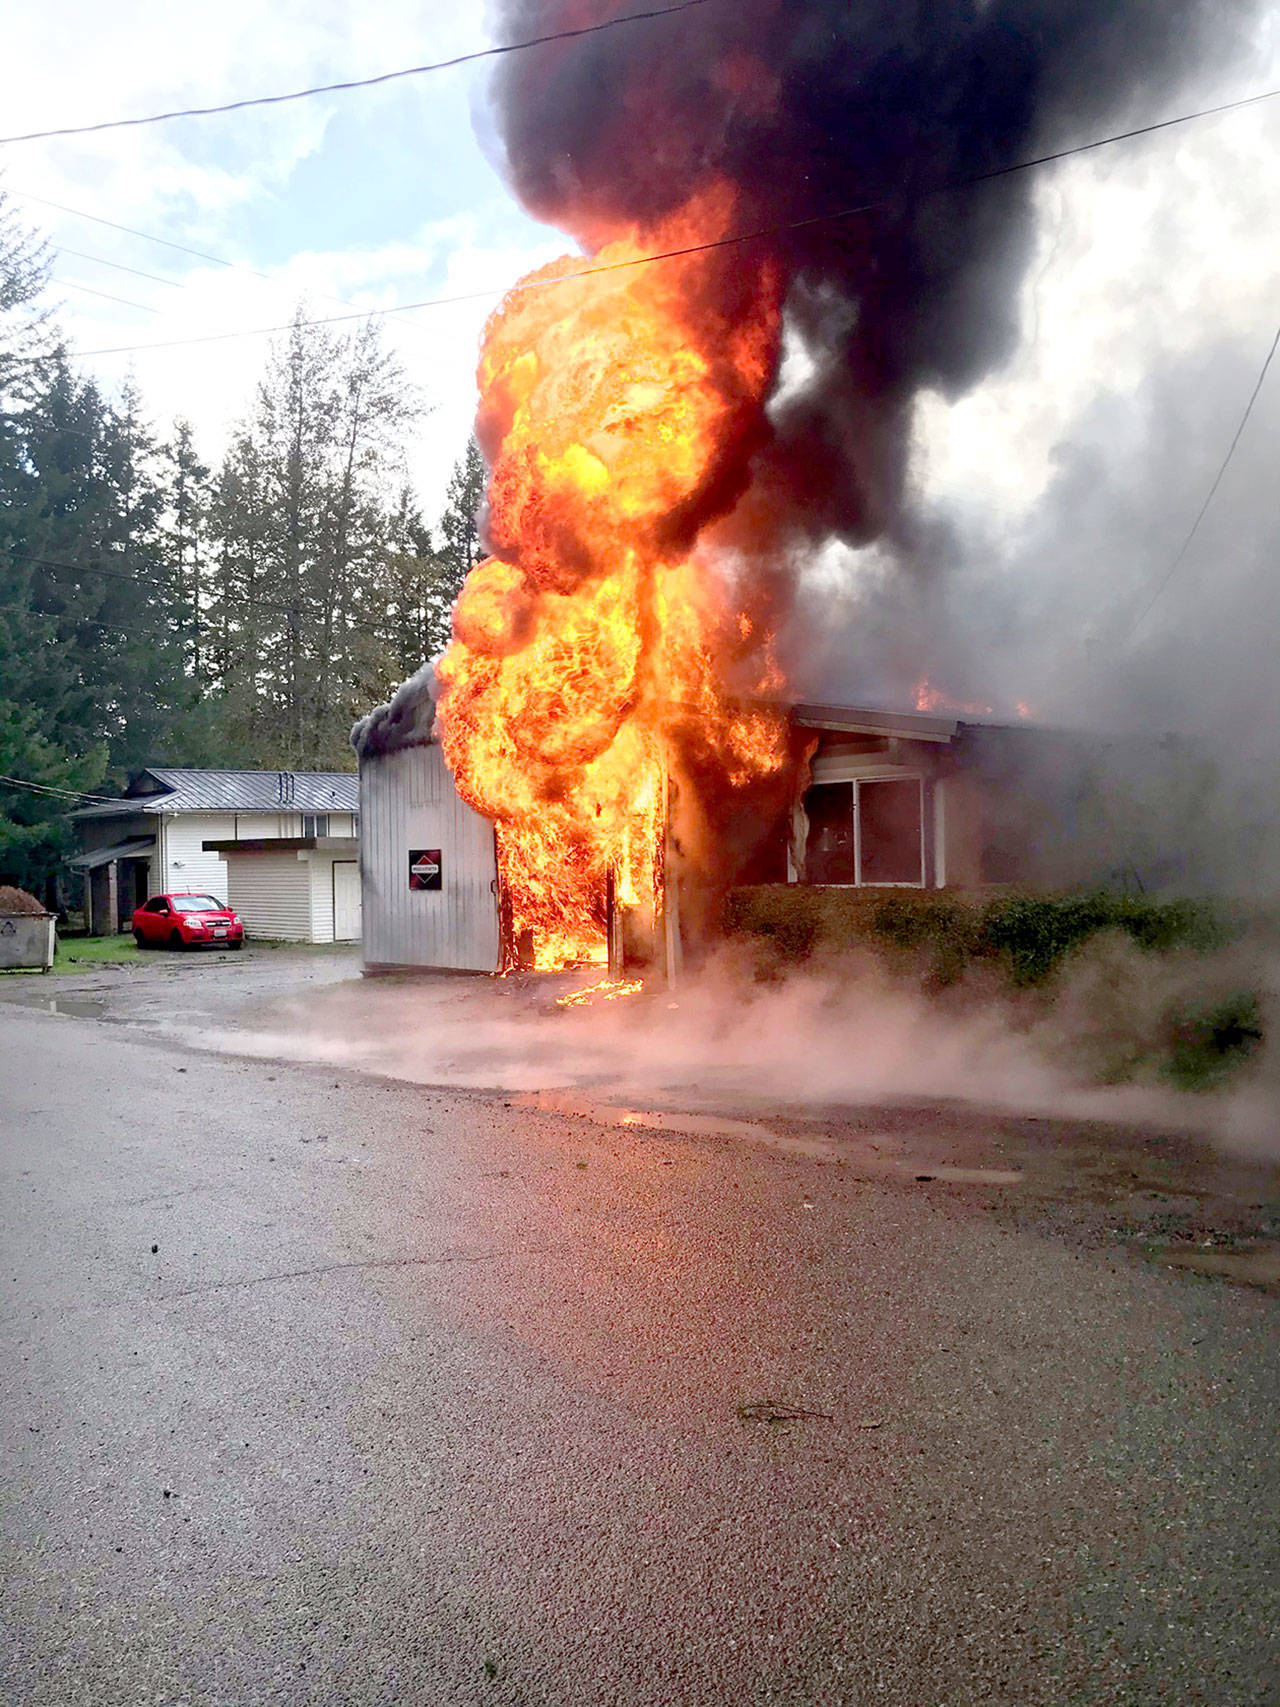 A fire destroyed a store at 221 Wood St. in Forks on Tuesday, Oct. 13, 2020. (Photo courtesy of Clallam County Fire District 1)